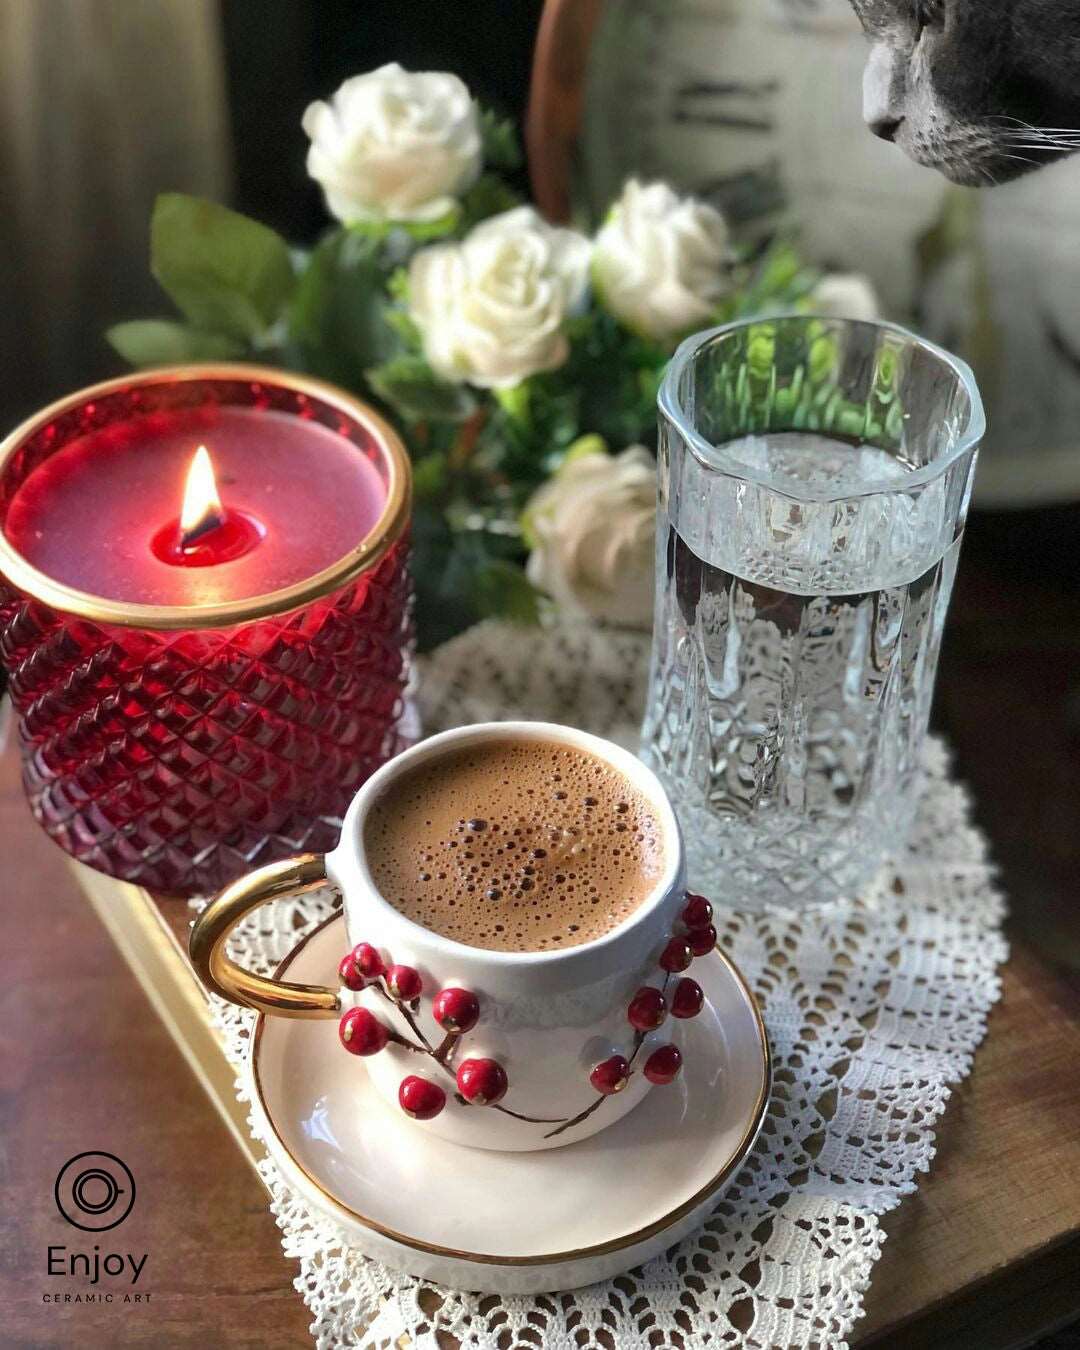 Aromatic espresso in a white and red winterberry-designed cup with a gold handle, on a saucer atop a lace doily, with a red candle, white roses, and a cat in the soft-focused background.